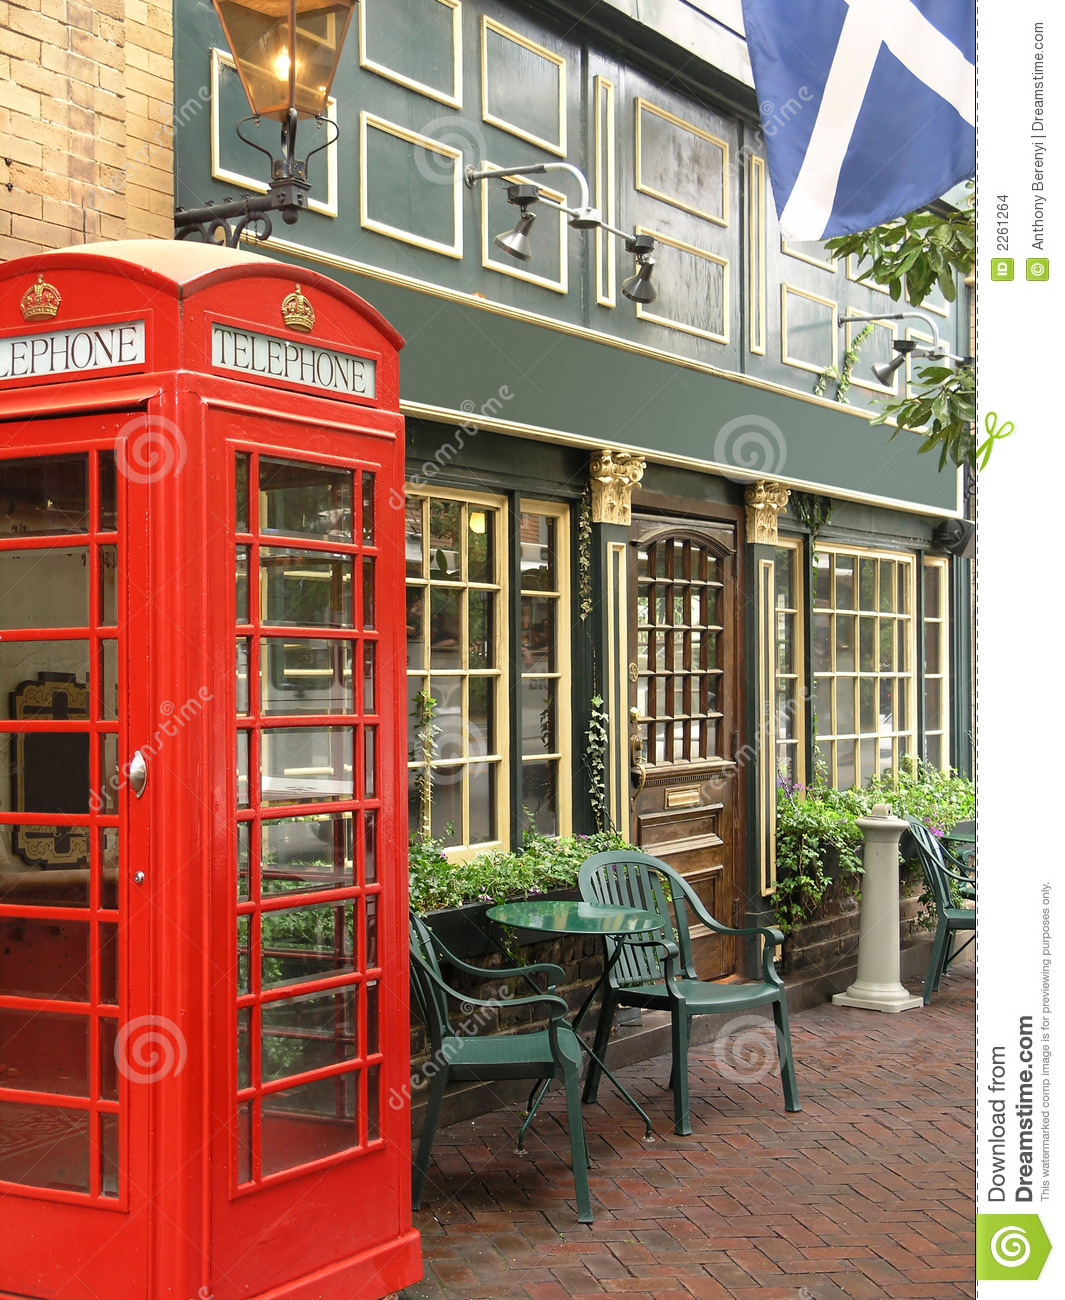 English Pub With Exterior Red Telephone Booth